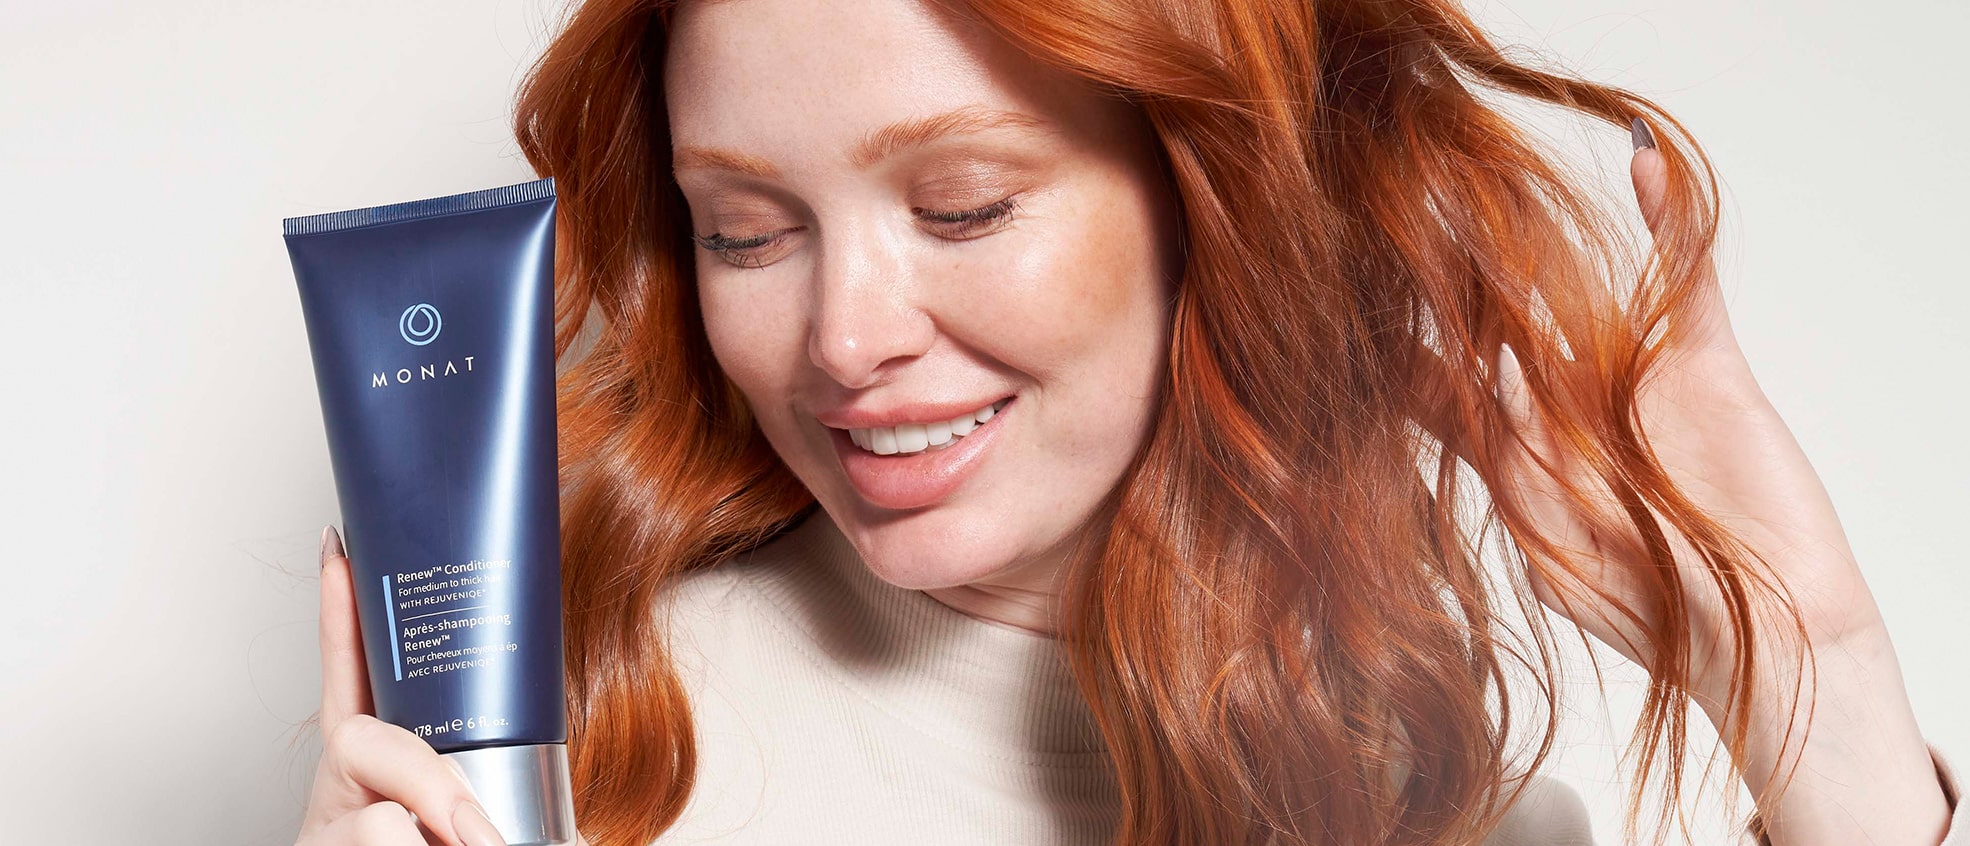 Red-haired woman holding a tube of Renew Conditioner.